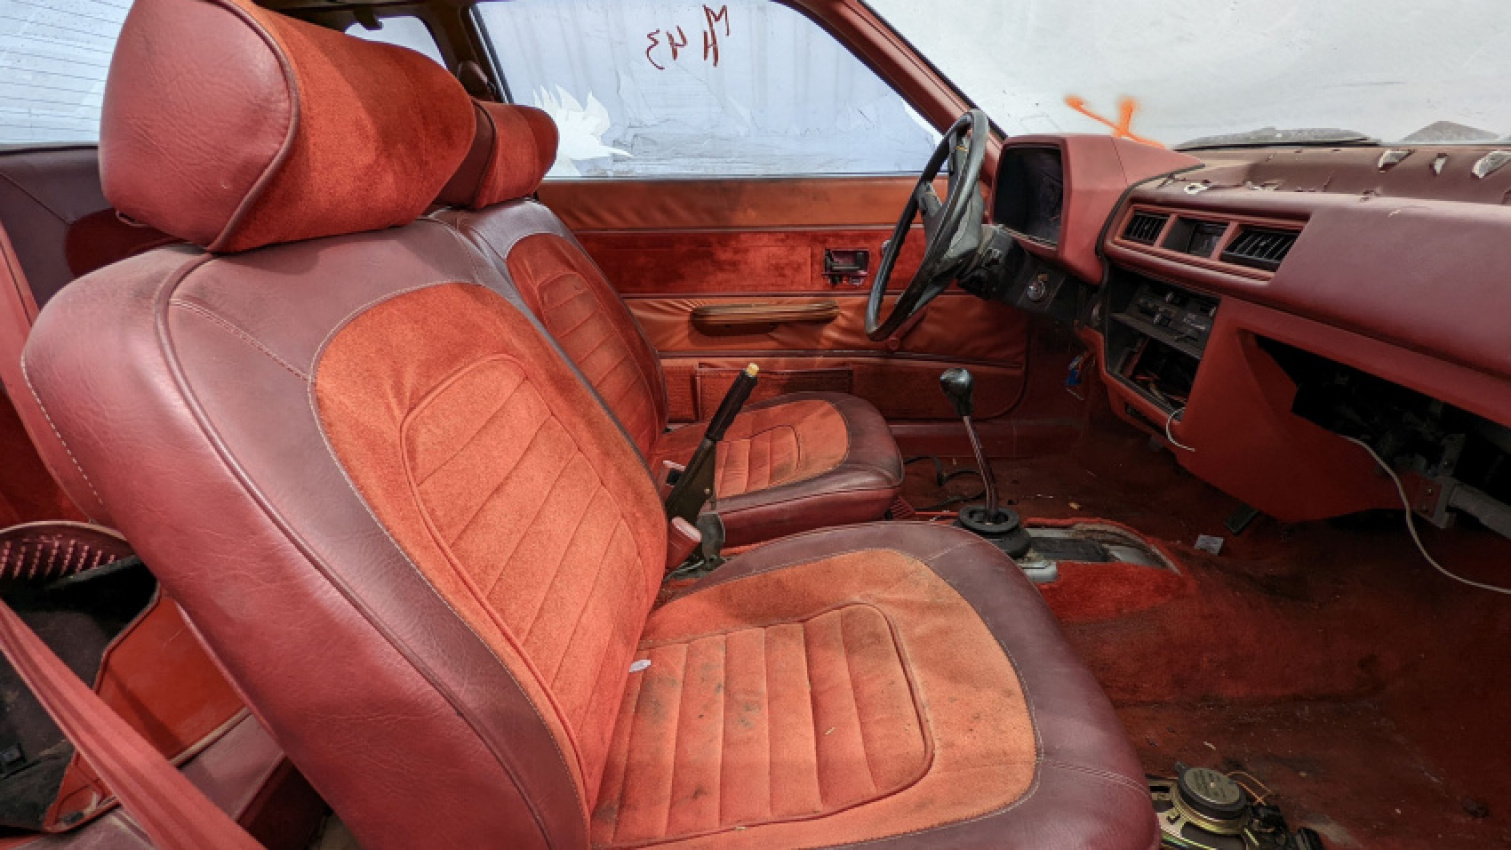 autos, car life, cars, classic cars, dell, honda, this 1981 honda prelude will bring its bordello red interior to the crusher